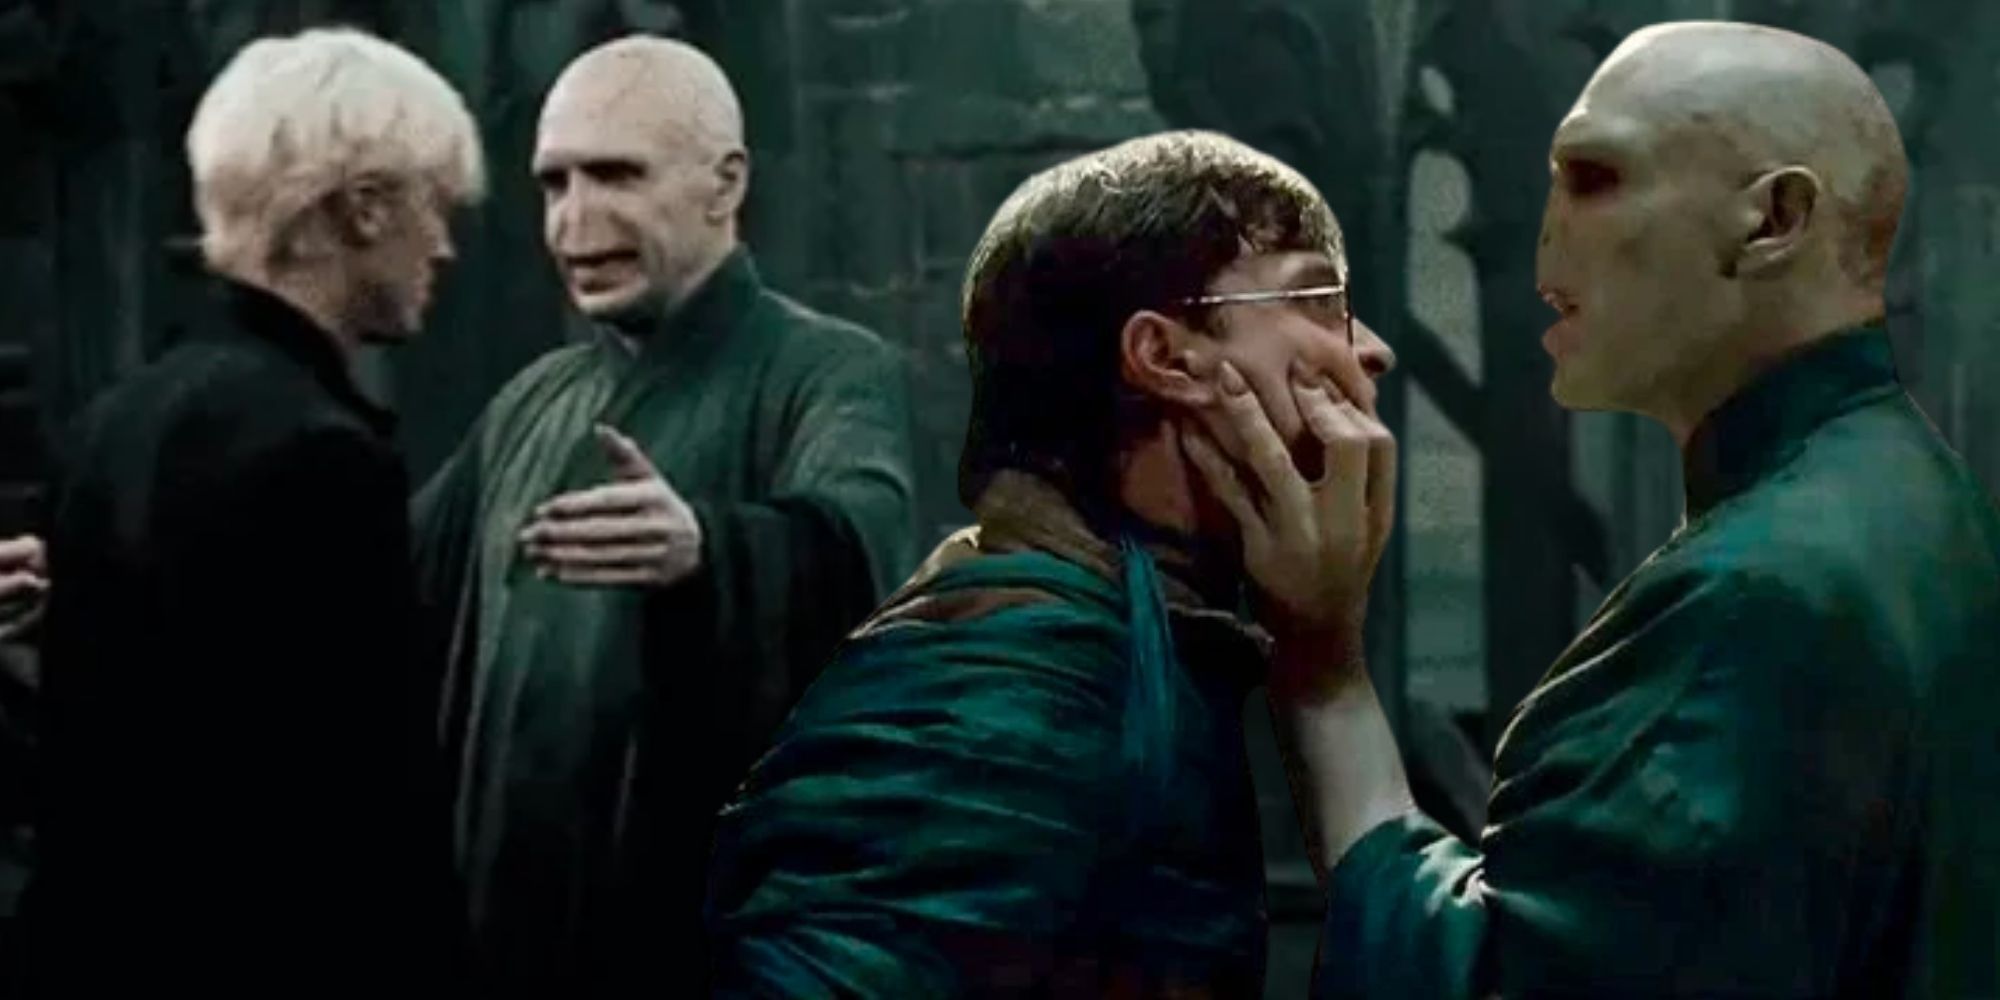 Harry Potter and the Deathly Hallows Part II Tom Felton Ralph Feinnes and Daniel Radcliffe Draco and Voldemort hugging and Harry Potter and Voldemort face to face